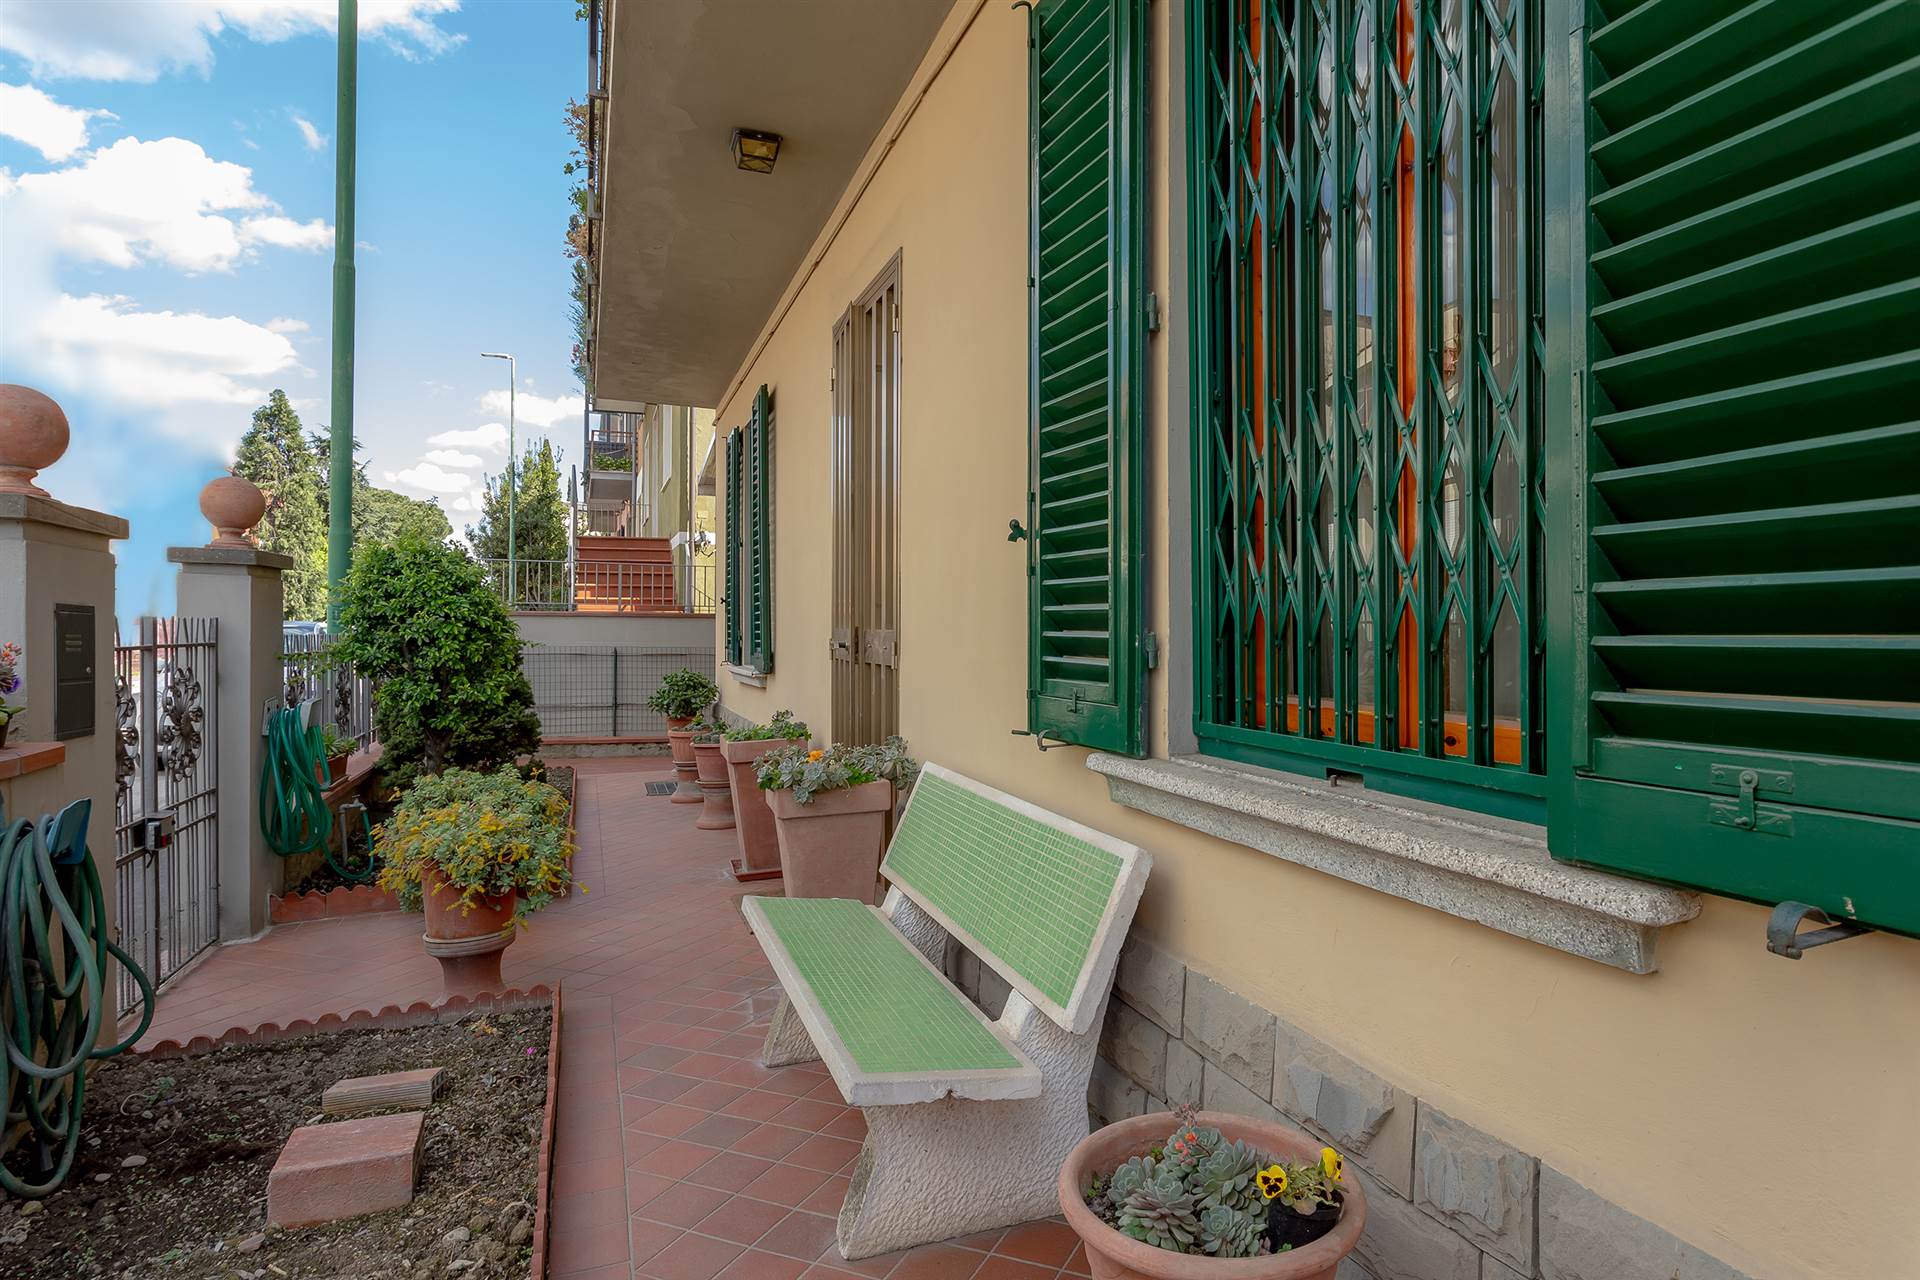 CAPALLE, CAMPI BISENZIO, Apartment for sale of 118 Sq. mt., Excellent Condition, Heating Individual heating system, Energetic class: G, placed at 